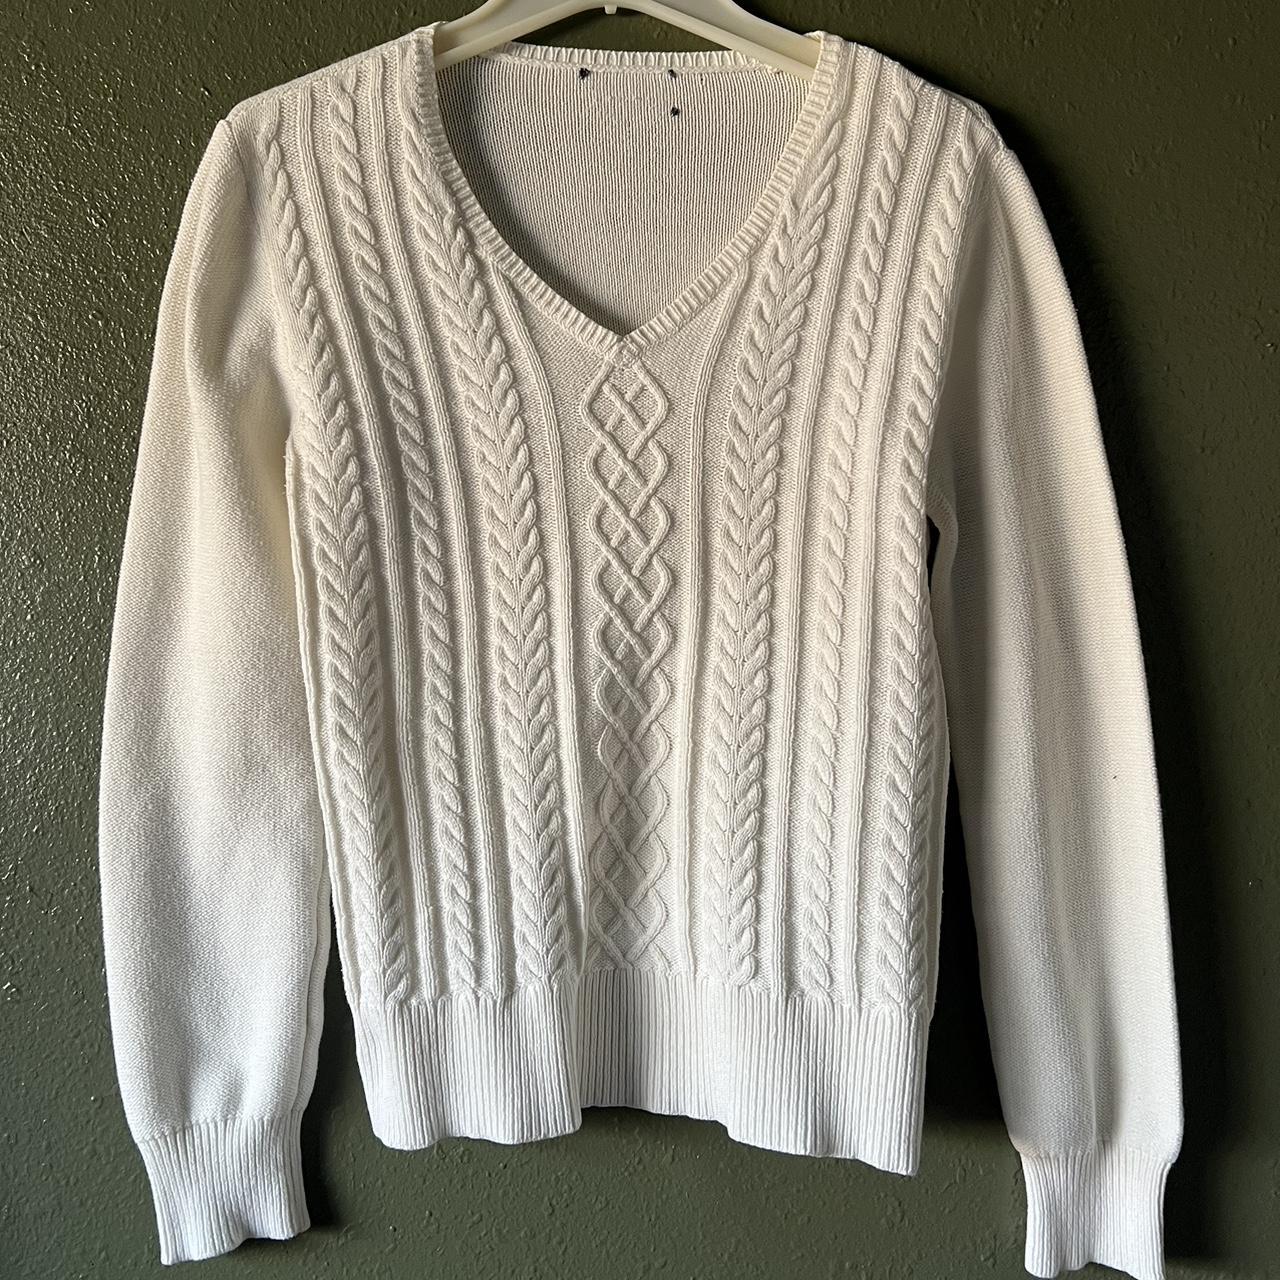 White Cable Knit Sweater Size: s - m ... - Depop